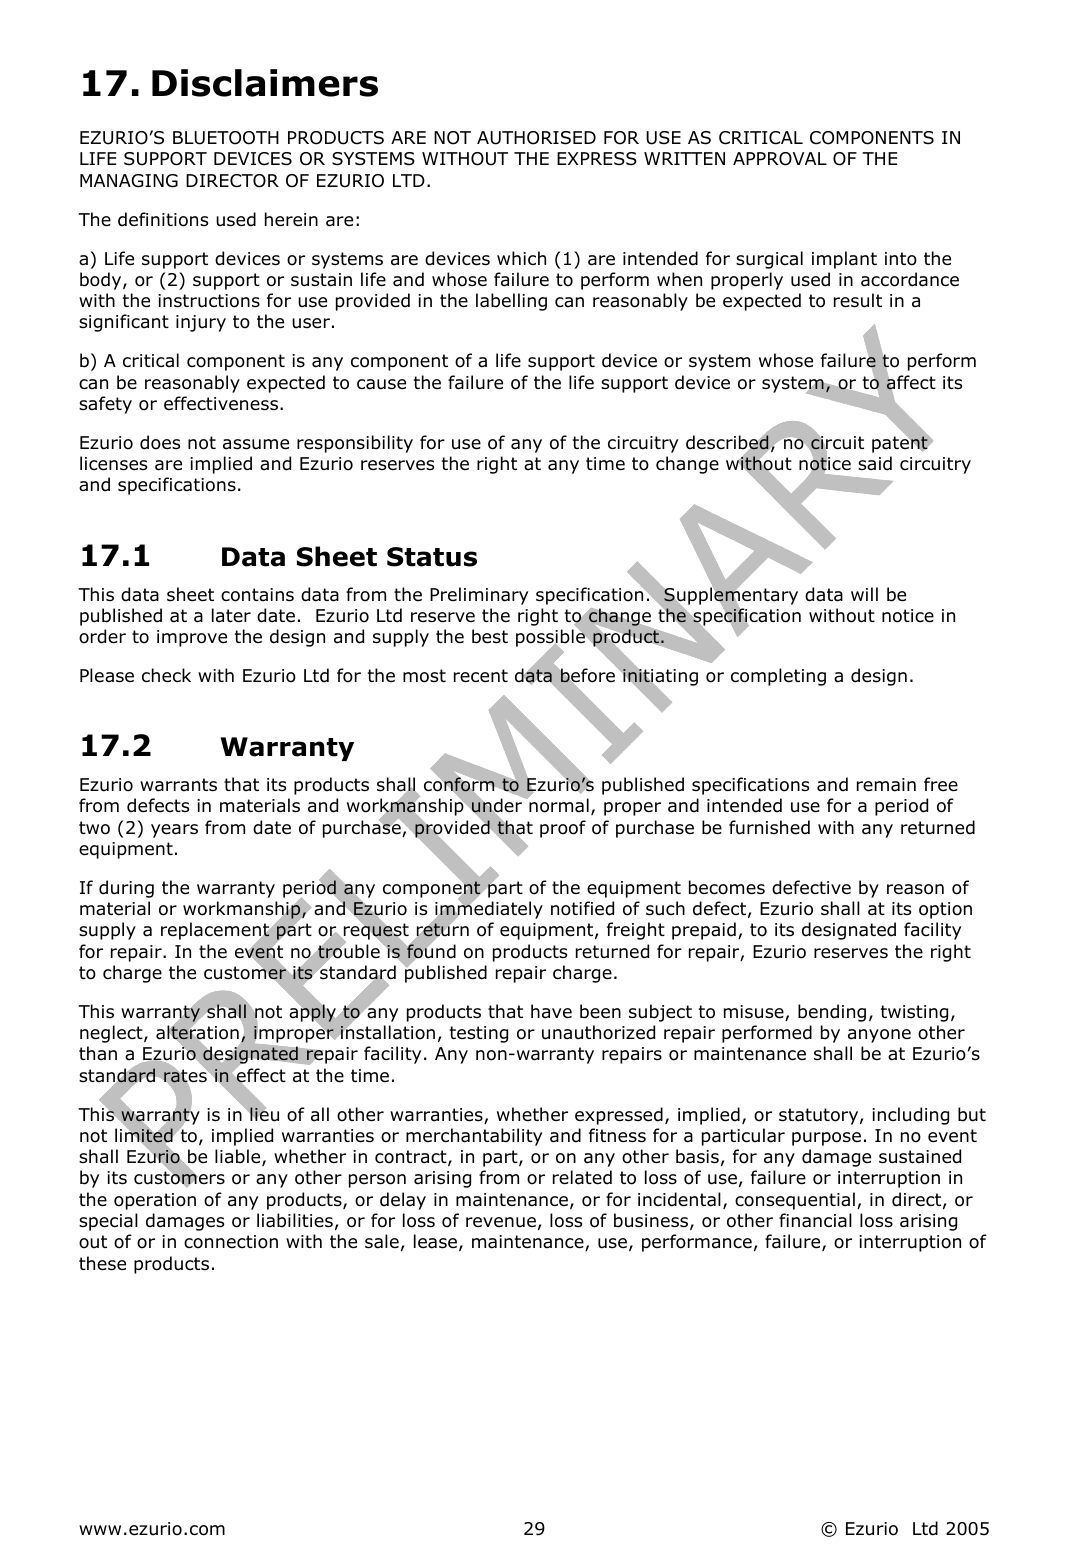  www.ezurio.com  © Ezurio  Ltd 2005 2917. Disclaimers EZURIO’S BLUETOOTH PRODUCTS ARE NOT AUTHORISED FOR USE AS CRITICAL COMPONENTS IN LIFE SUPPORT DEVICES OR SYSTEMS WITHOUT THE EXPRESS WRITTEN APPROVAL OF THE MANAGING DIRECTOR OF EZURIO LTD. The definitions used herein are: a) Life support devices or systems are devices which (1) are intended for surgical implant into the body, or (2) support or sustain life and whose failure to perform when properly used in accordance with the instructions for use provided in the labelling can reasonably be expected to result in a significant injury to the user. b) A critical component is any component of a life support device or system whose failure to perform can be reasonably expected to cause the failure of the life support device or system, or to affect its safety or effectiveness. Ezurio does not assume responsibility for use of any of the circuitry described, no circuit patent licenses are implied and Ezurio reserves the right at any time to change without notice said circuitry and specifications. 17.1  Data Sheet Status This data sheet contains data from the Preliminary specification.  Supplementary data will be published at a later date.  Ezurio Ltd reserve the right to change the specification without notice in order to improve the design and supply the best possible product. Please check with Ezurio Ltd for the most recent data before initiating or completing a design. 17.2  Warranty Ezurio warrants that its products shall conform to Ezurio’s published specifications and remain free from defects in materials and workmanship under normal, proper and intended use for a period of two (2) years from date of purchase, provided that proof of purchase be furnished with any returned equipment. If during the warranty period any component part of the equipment becomes defective by reason of material or workmanship, and Ezurio is immediately notified of such defect, Ezurio shall at its option supply a replacement part or request return of equipment, freight prepaid, to its designated facility for repair. In the event no trouble is found on products returned for repair, Ezurio reserves the right to charge the customer its standard published repair charge. This warranty shall not apply to any products that have been subject to misuse, bending, twisting, neglect, alteration, improper installation, testing or unauthorized repair performed by anyone other than a Ezurio designated repair facility. Any non-warranty repairs or maintenance shall be at Ezurio’s standard rates in effect at the time. This warranty is in lieu of all other warranties, whether expressed, implied, or statutory, including but not limited to, implied warranties or merchantability and fitness for a particular purpose. In no event shall Ezurio be liable, whether in contract, in part, or on any other basis, for any damage sustained by its customers or any other person arising from or related to loss of use, failure or interruption in the operation of any products, or delay in maintenance, or for incidental, consequential, in direct, or special damages or liabilities, or for loss of revenue, loss of business, or other financial loss arising out of or in connection with the sale, lease, maintenance, use, performance, failure, or interruption of these products.  